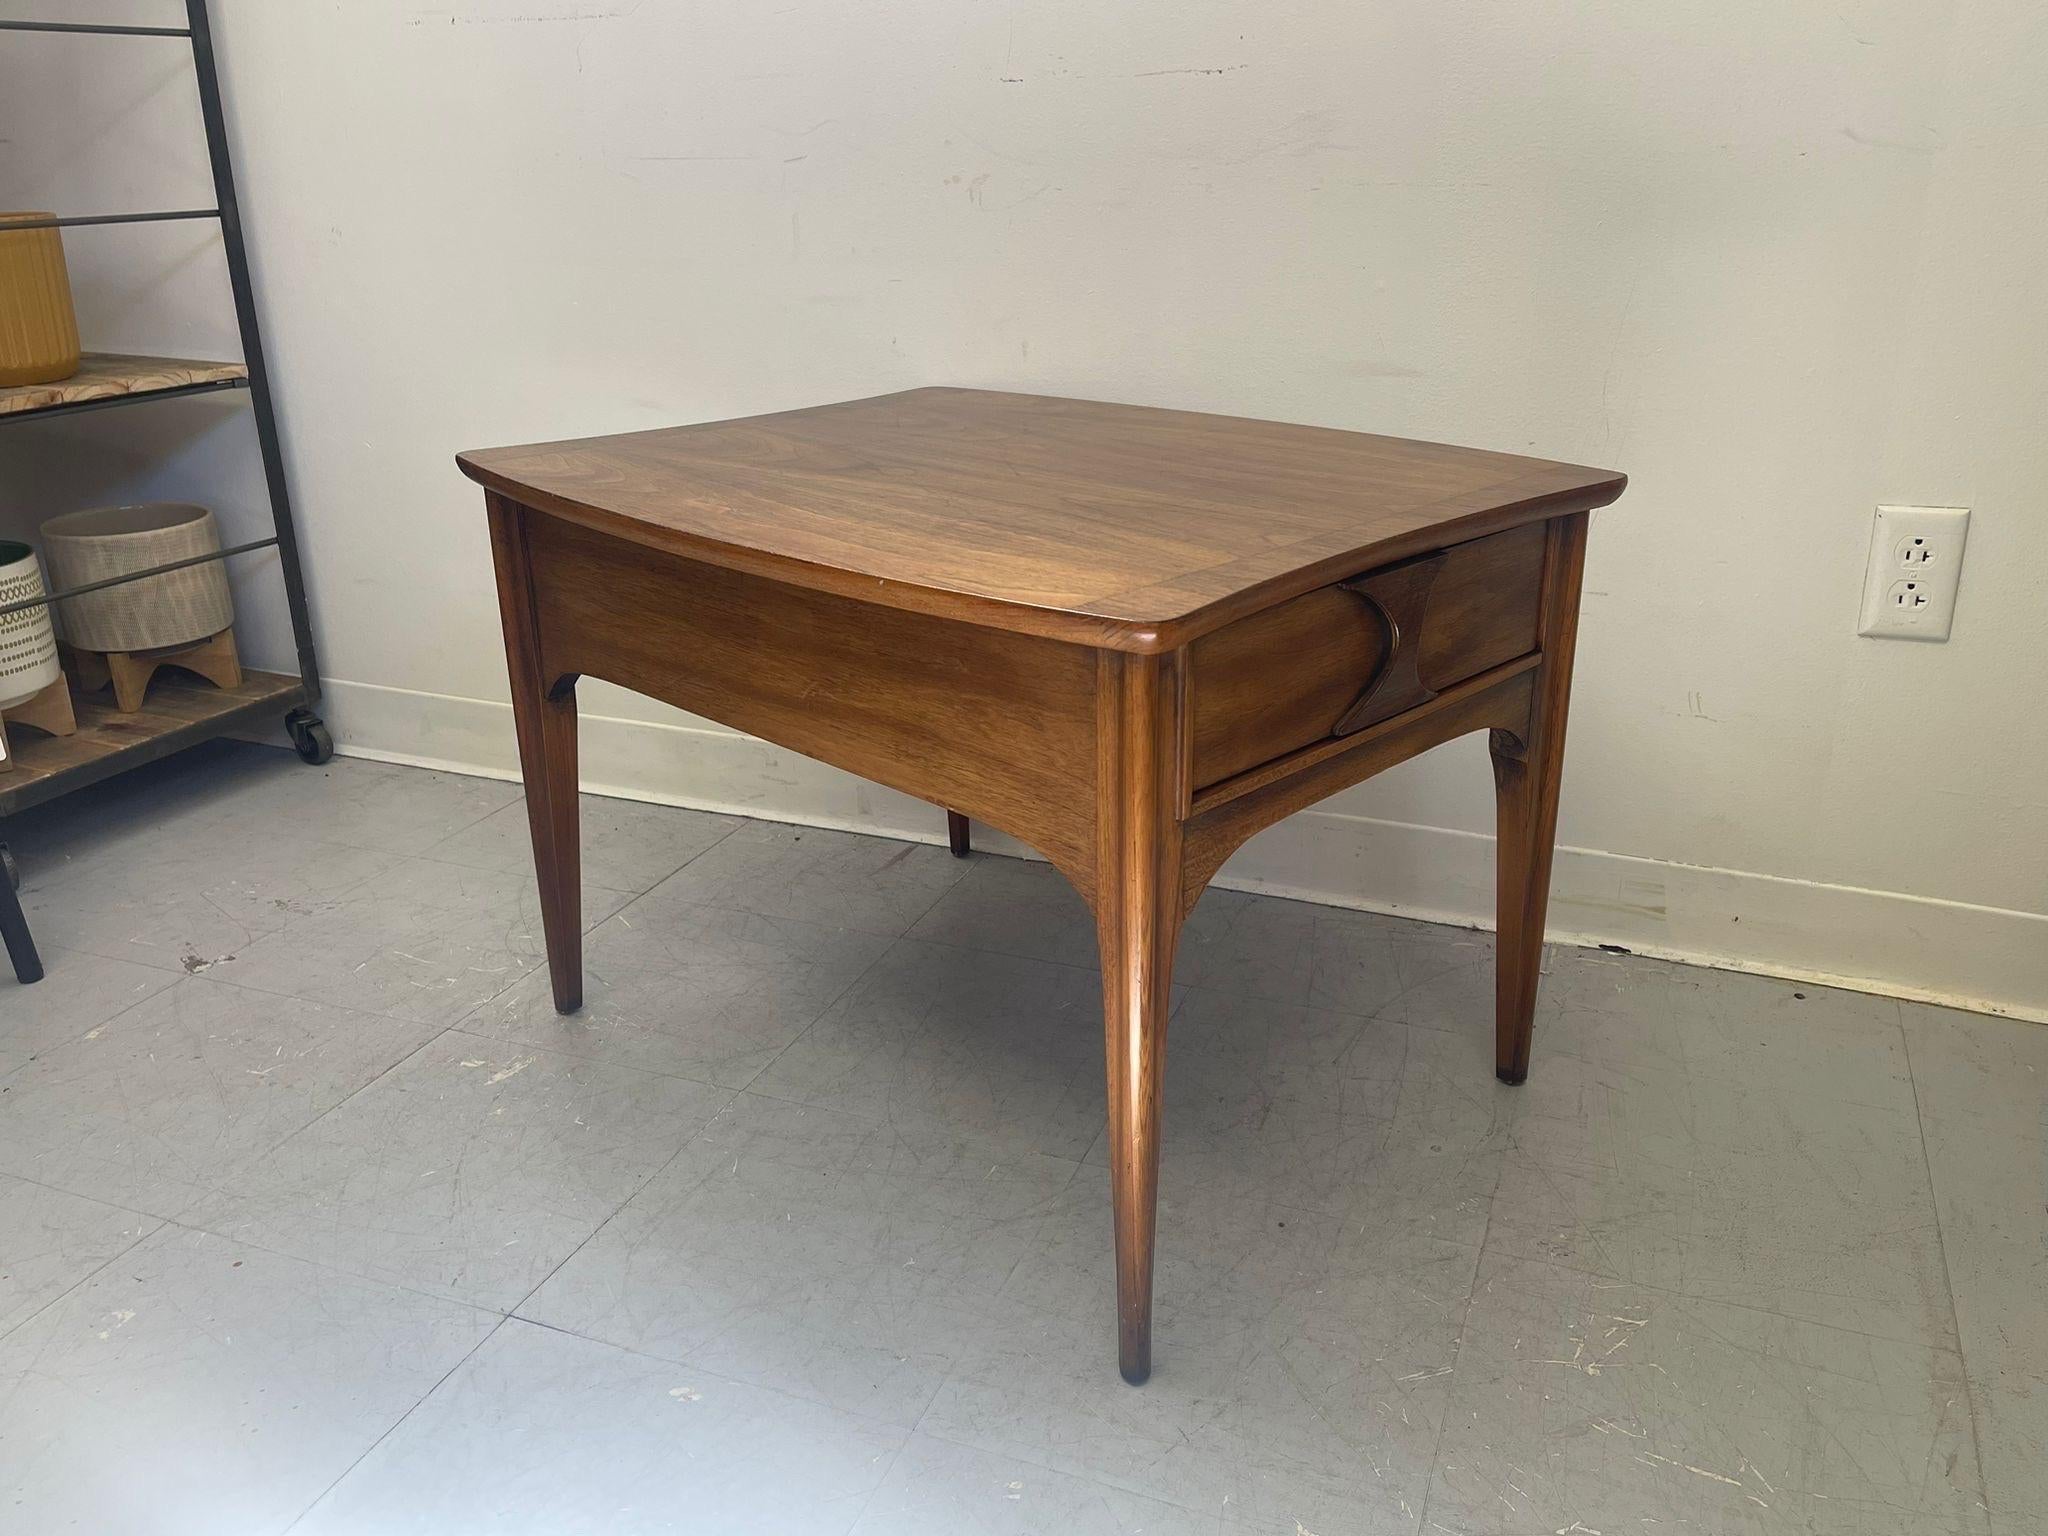 Walnut toned accent Table with Dovetailed drawers and carved wood handles. Vintage Condition Consistent with Age as Pictured.

Dimensions. 30 W ; 24 D ; 20 H